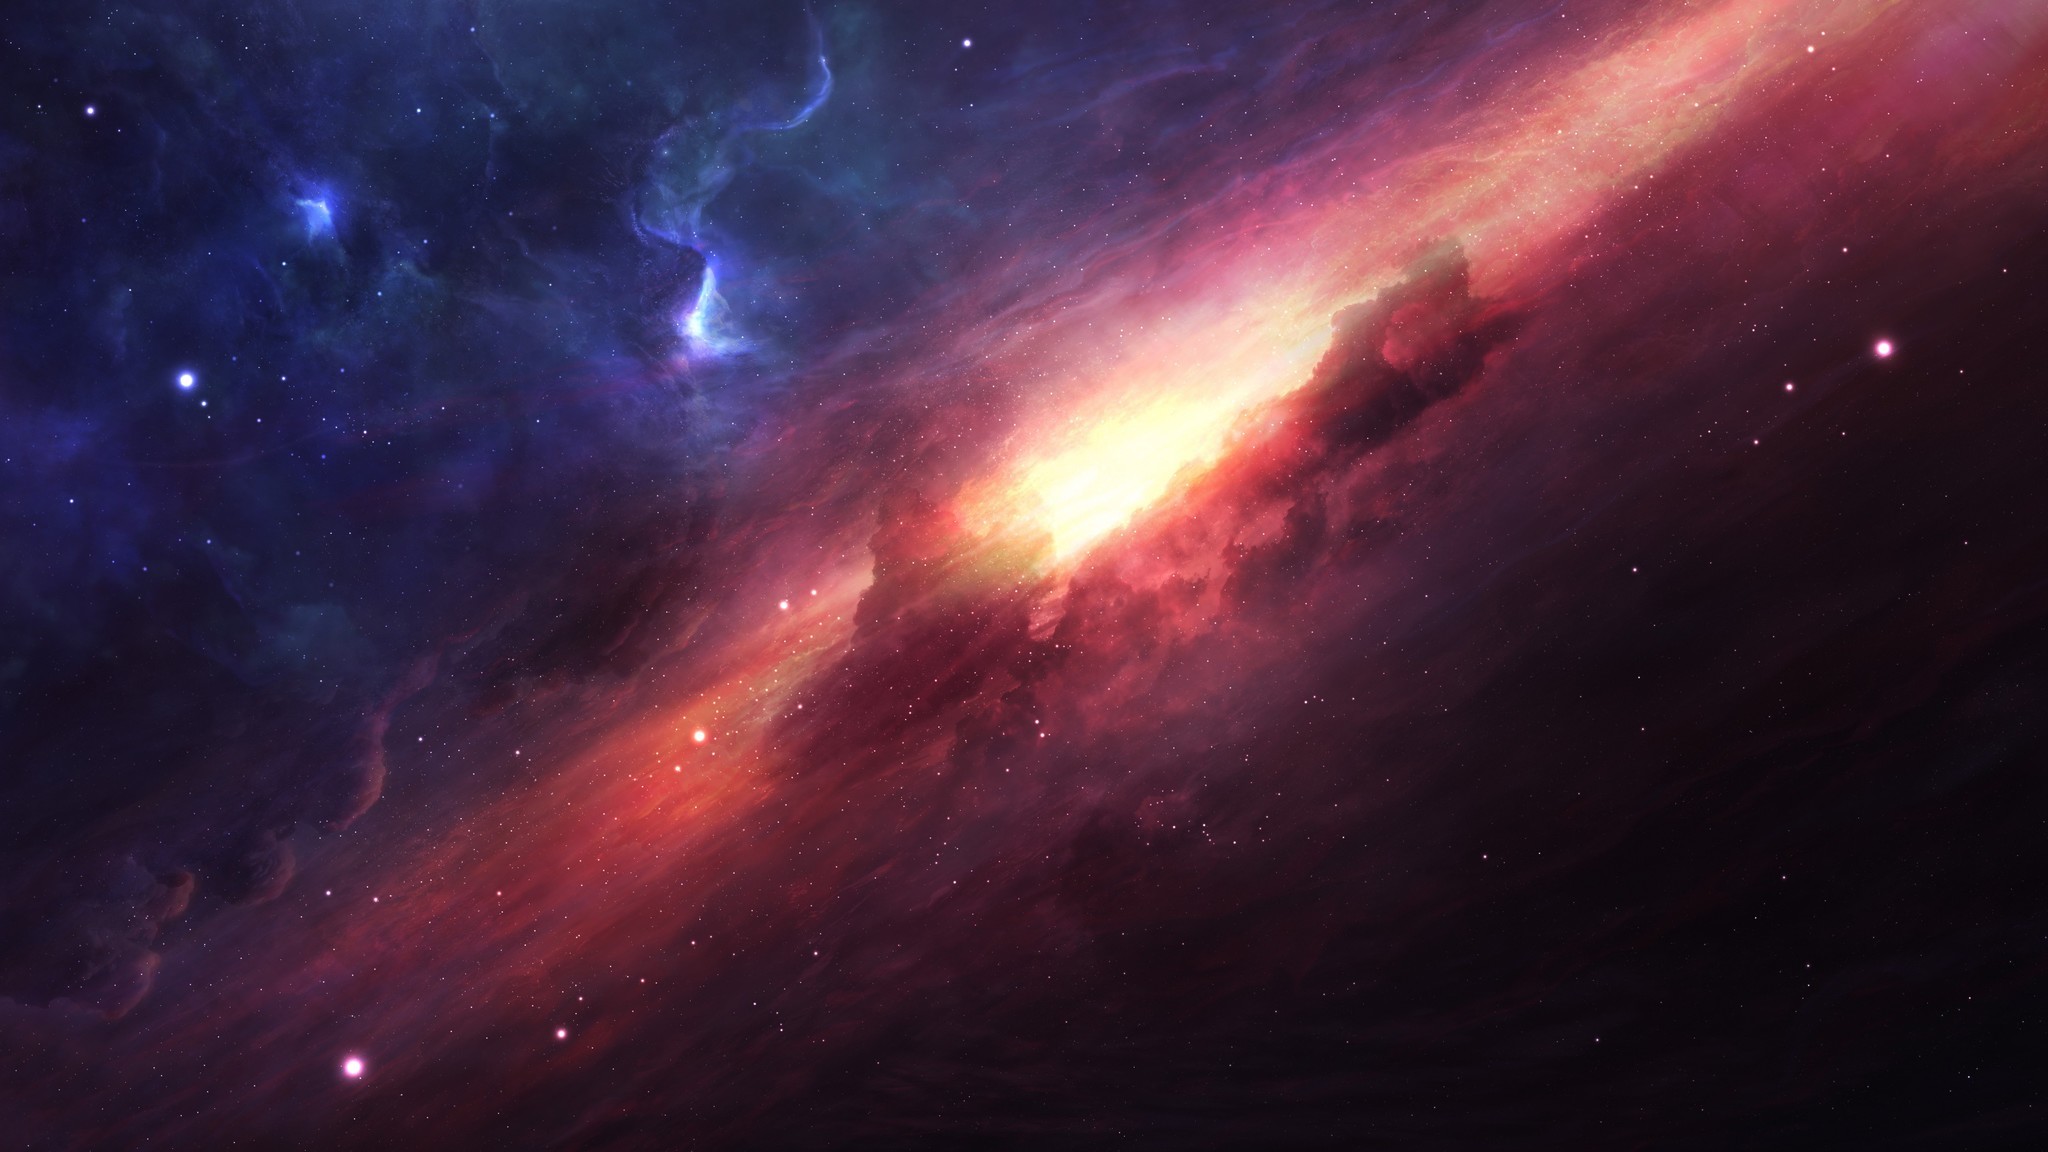 2048x1152 Space art resolution wallpapers images jpg  Art space 2048 1152